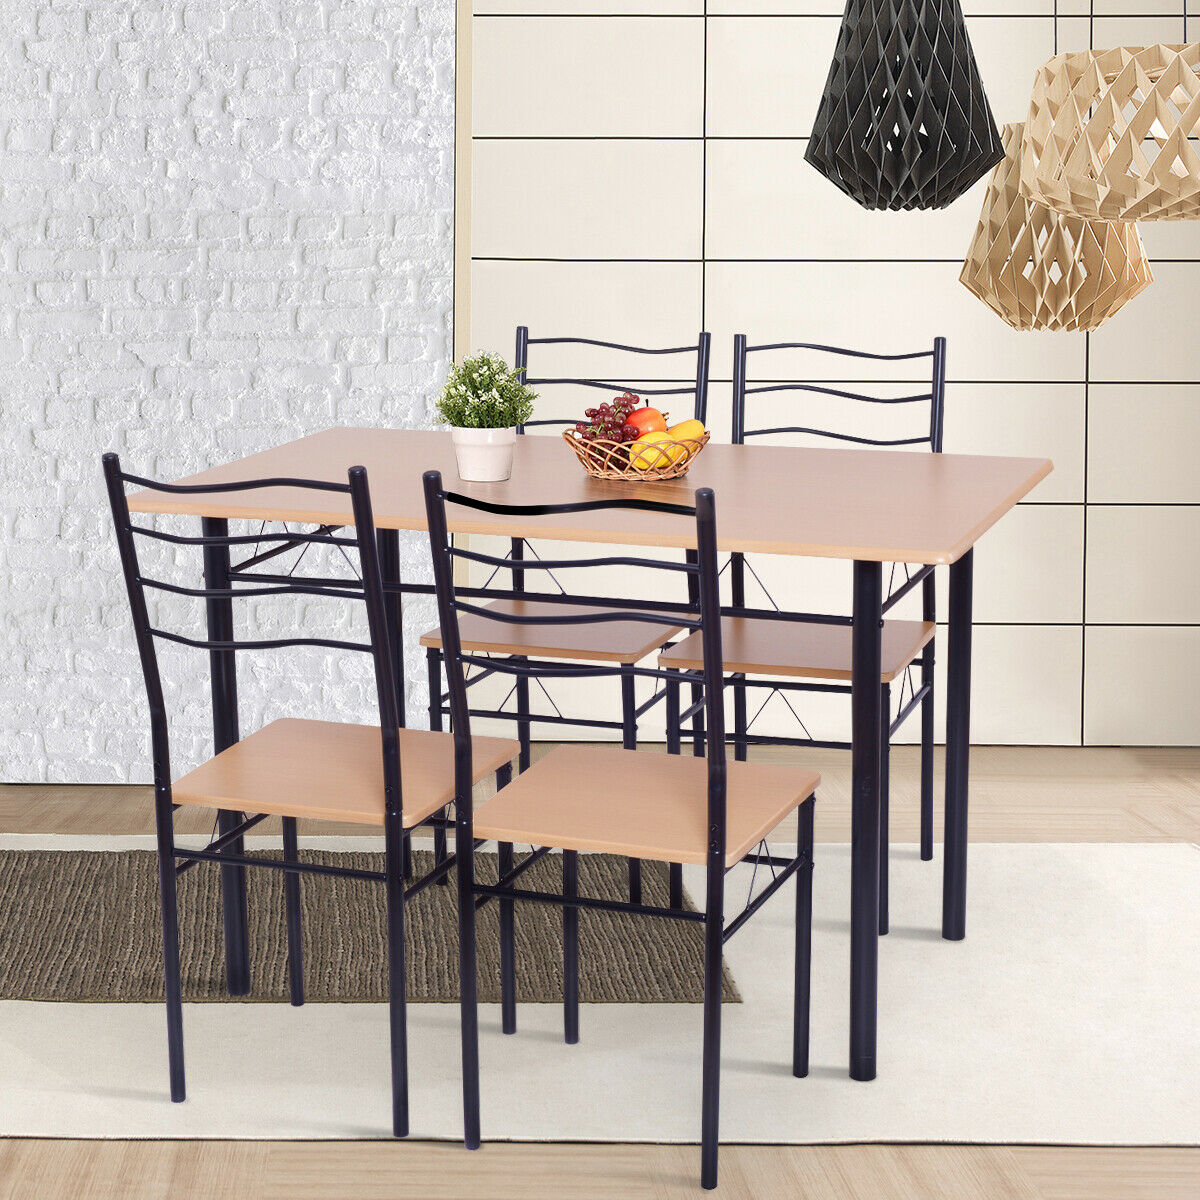 Costway 5 Piece Dining Table Set 29.5" with 4 Chairs Wood Metal Kitchen Breakfast Furniture Brown - image 4 of 8